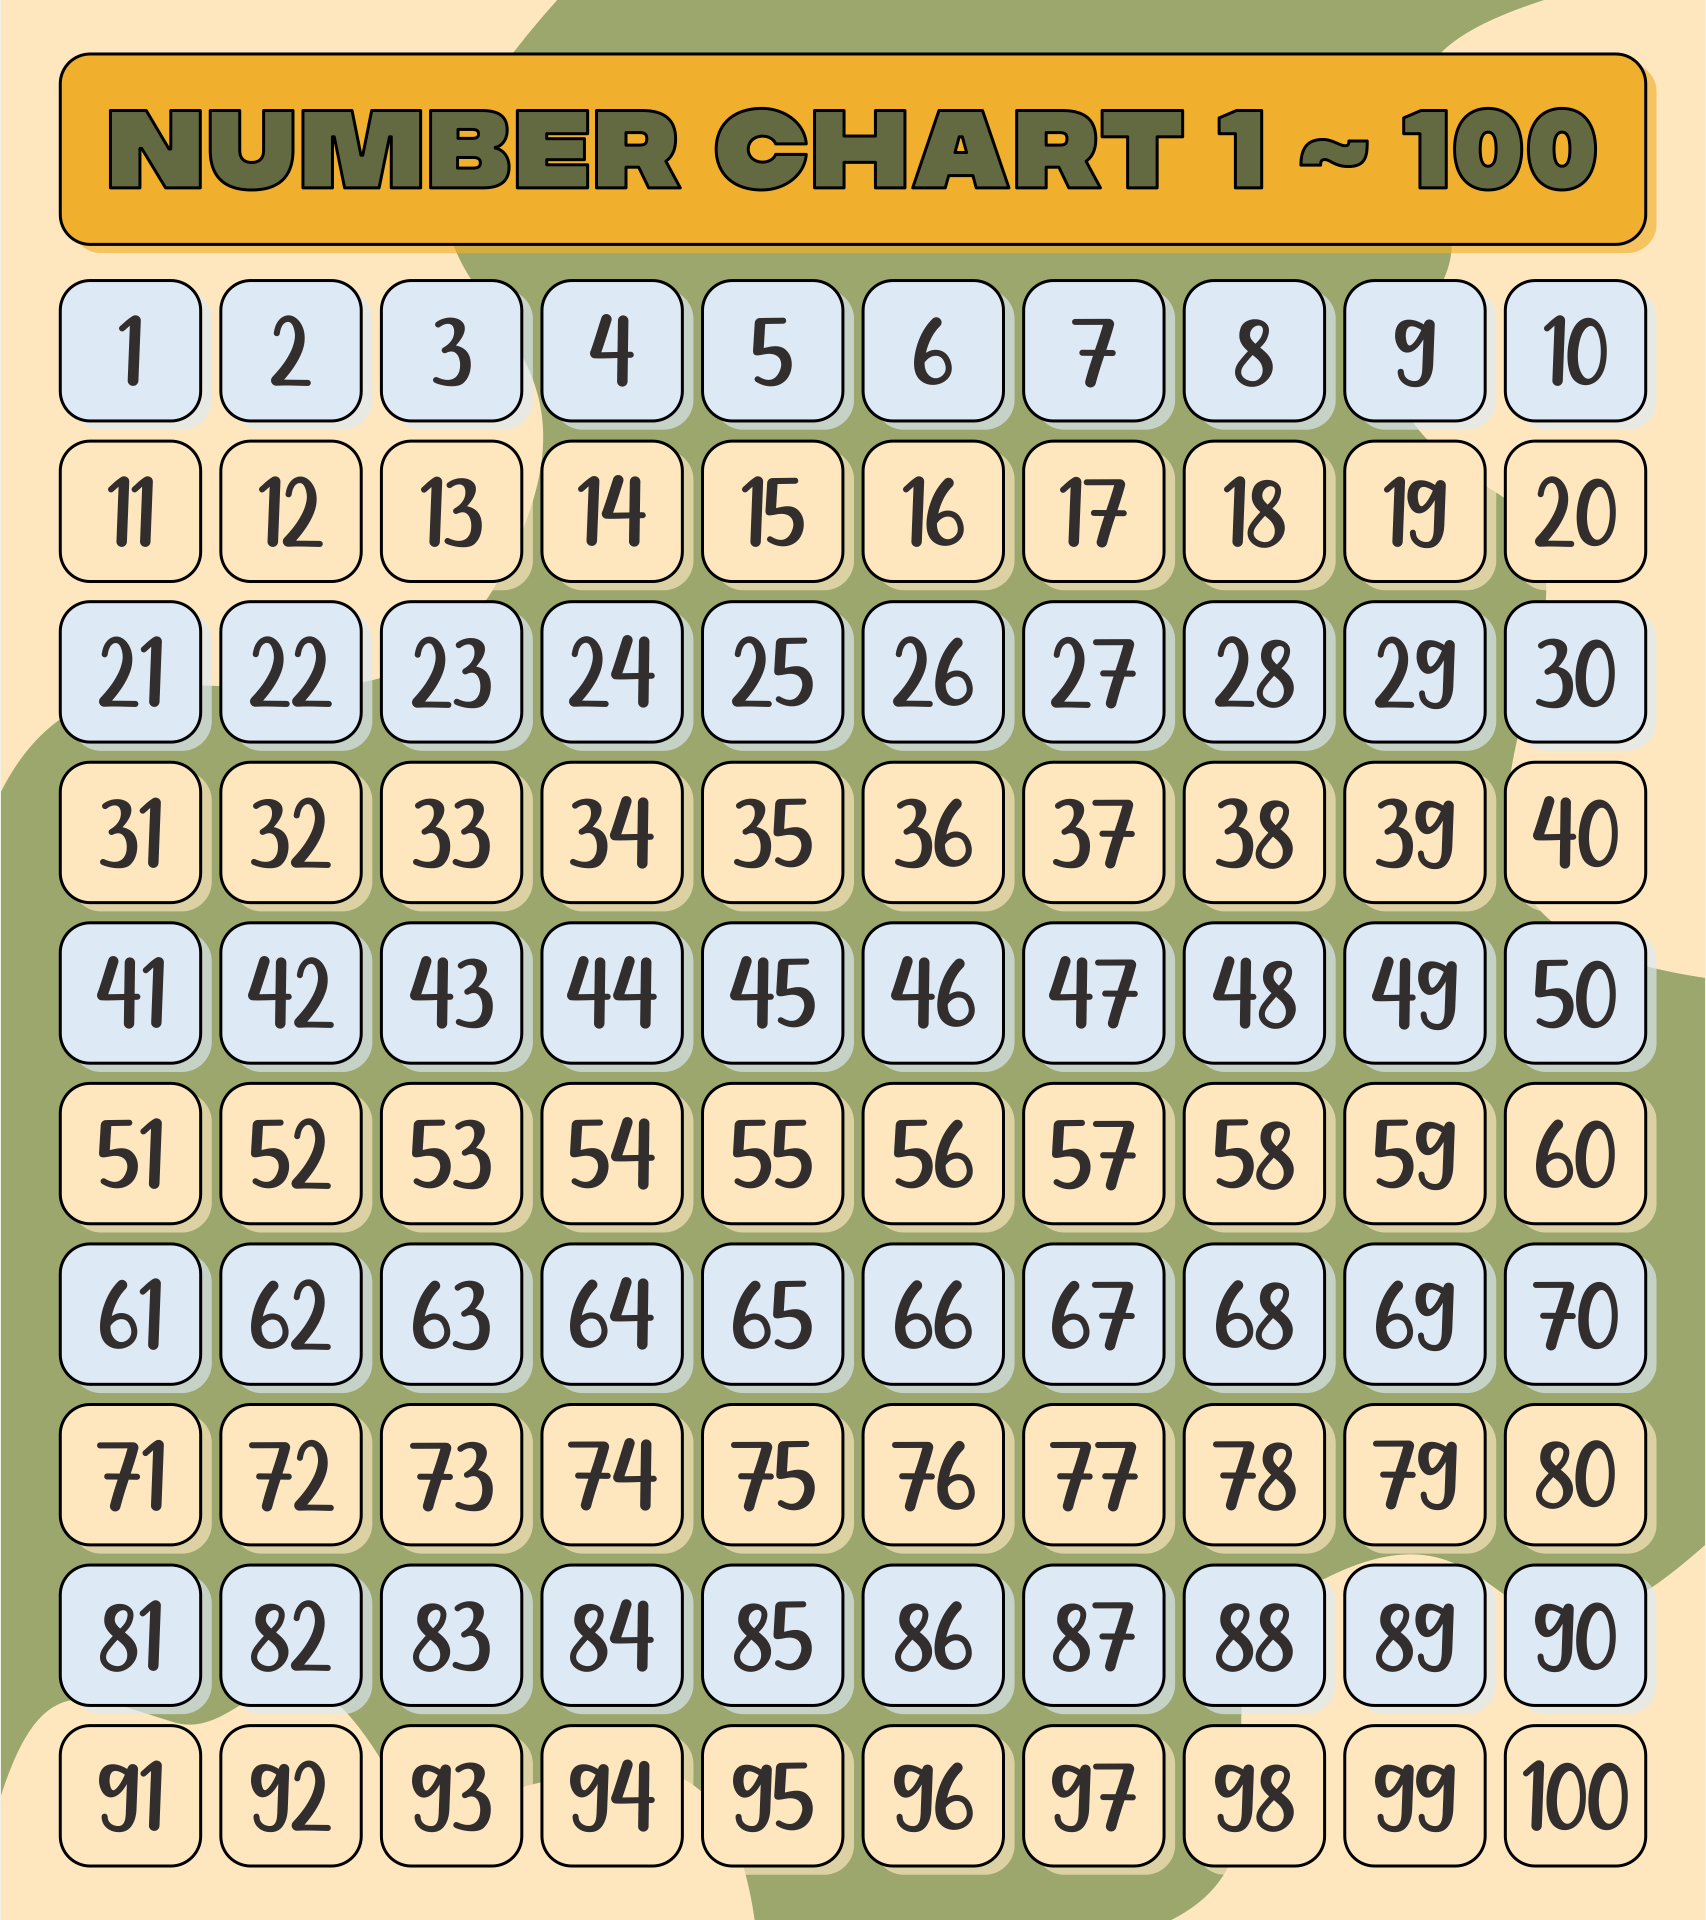 6-best-images-of-numbers-from-1-100-chart-printable-printable-number